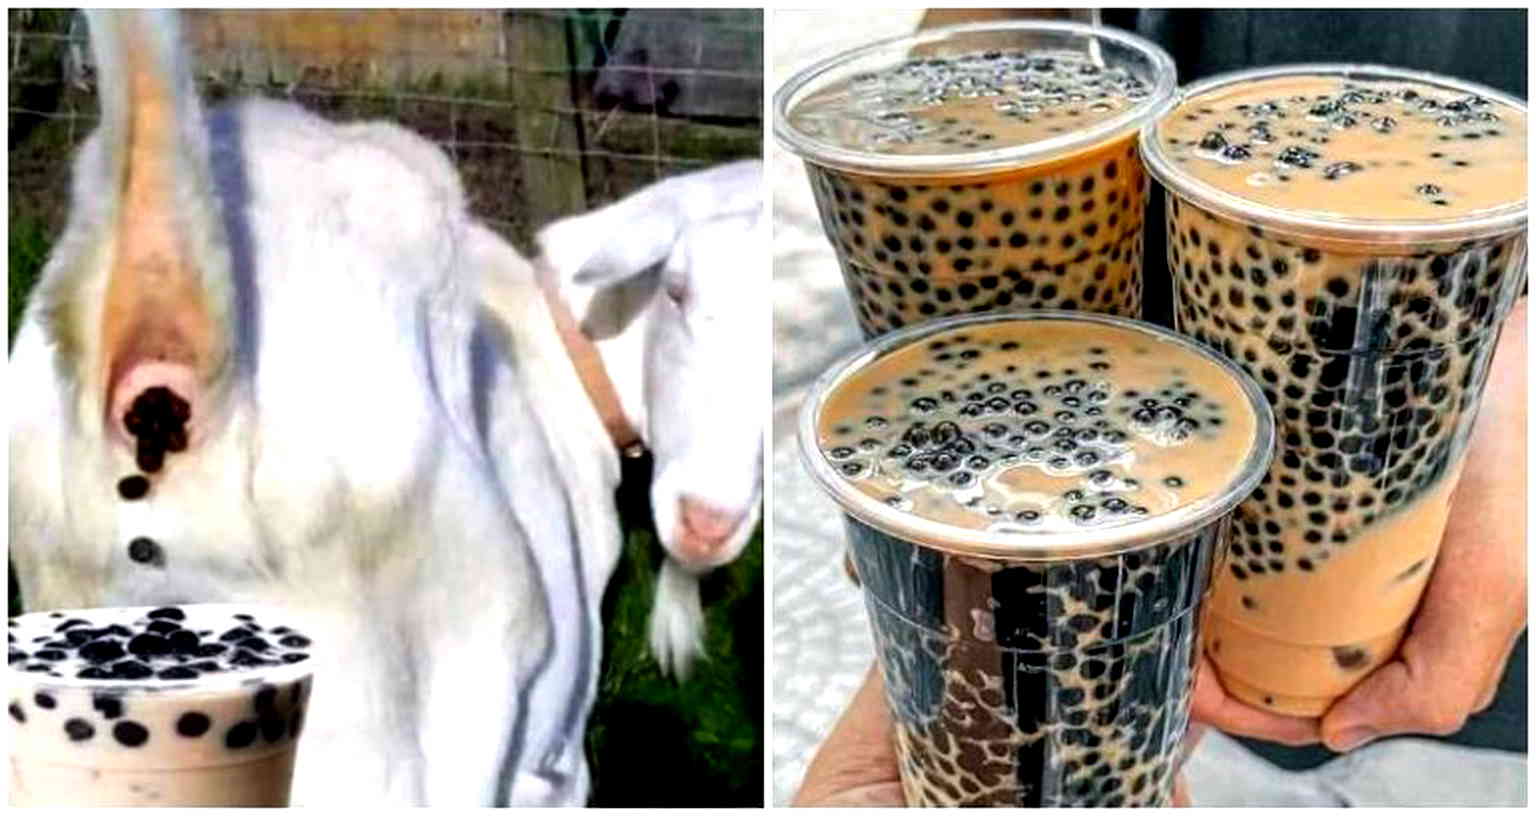 Debunked: Viral social media post claims goat feces used in bubble tea in China